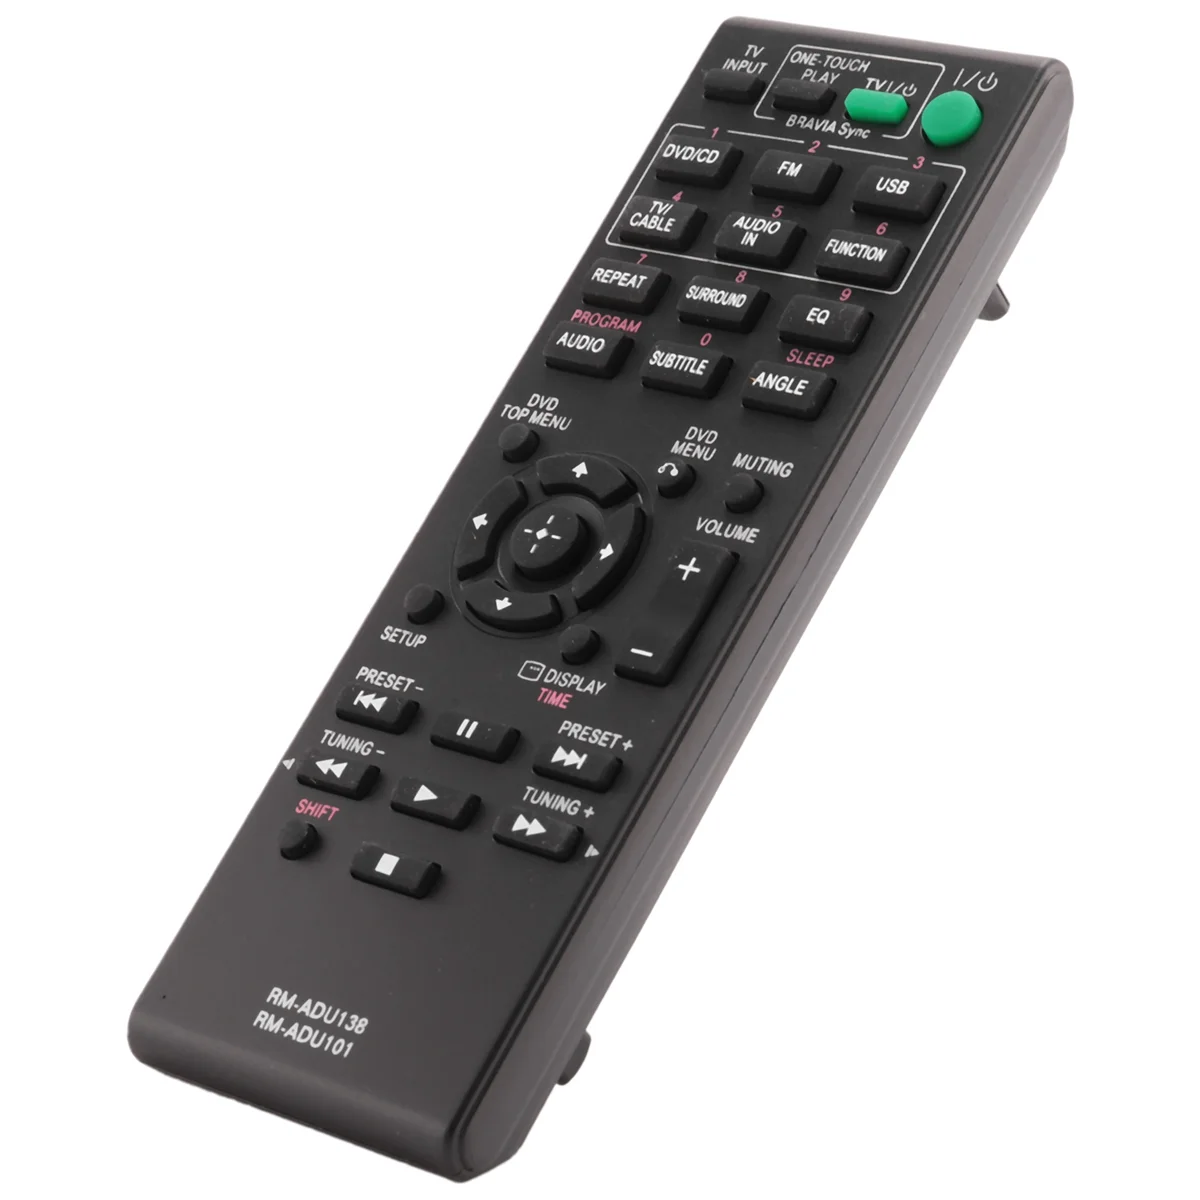 

Remote Control for Sony AV SYSTEM Home Theater RM-ADU138 DAV-TZ140 HBD-TZ130 HBD-TZ140 Remote Control Replacement